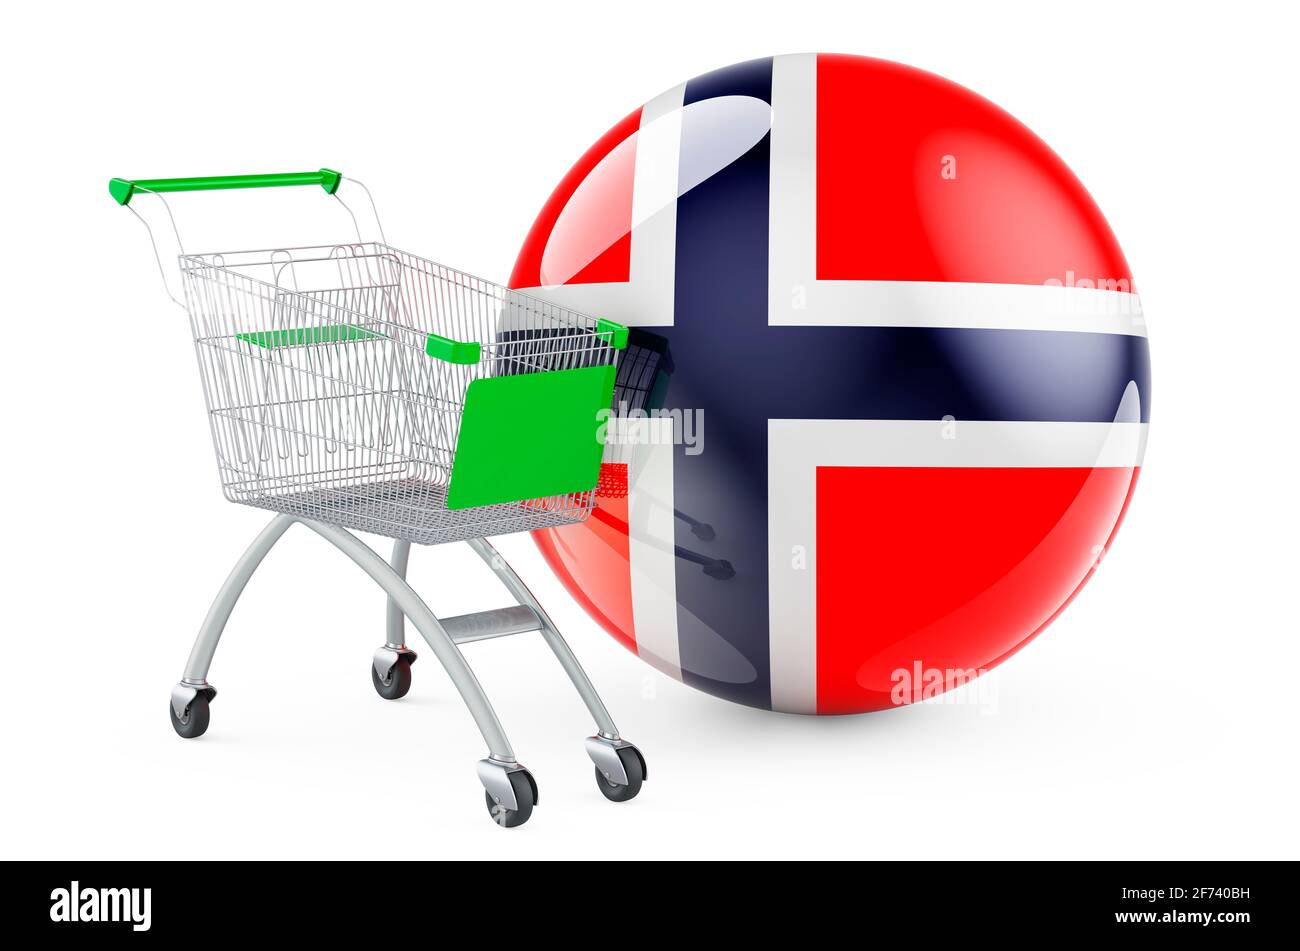 Shopping cart with Norwegian flag. Shopping in Norway concept. 3D rendering isolated on white background Stock Photo